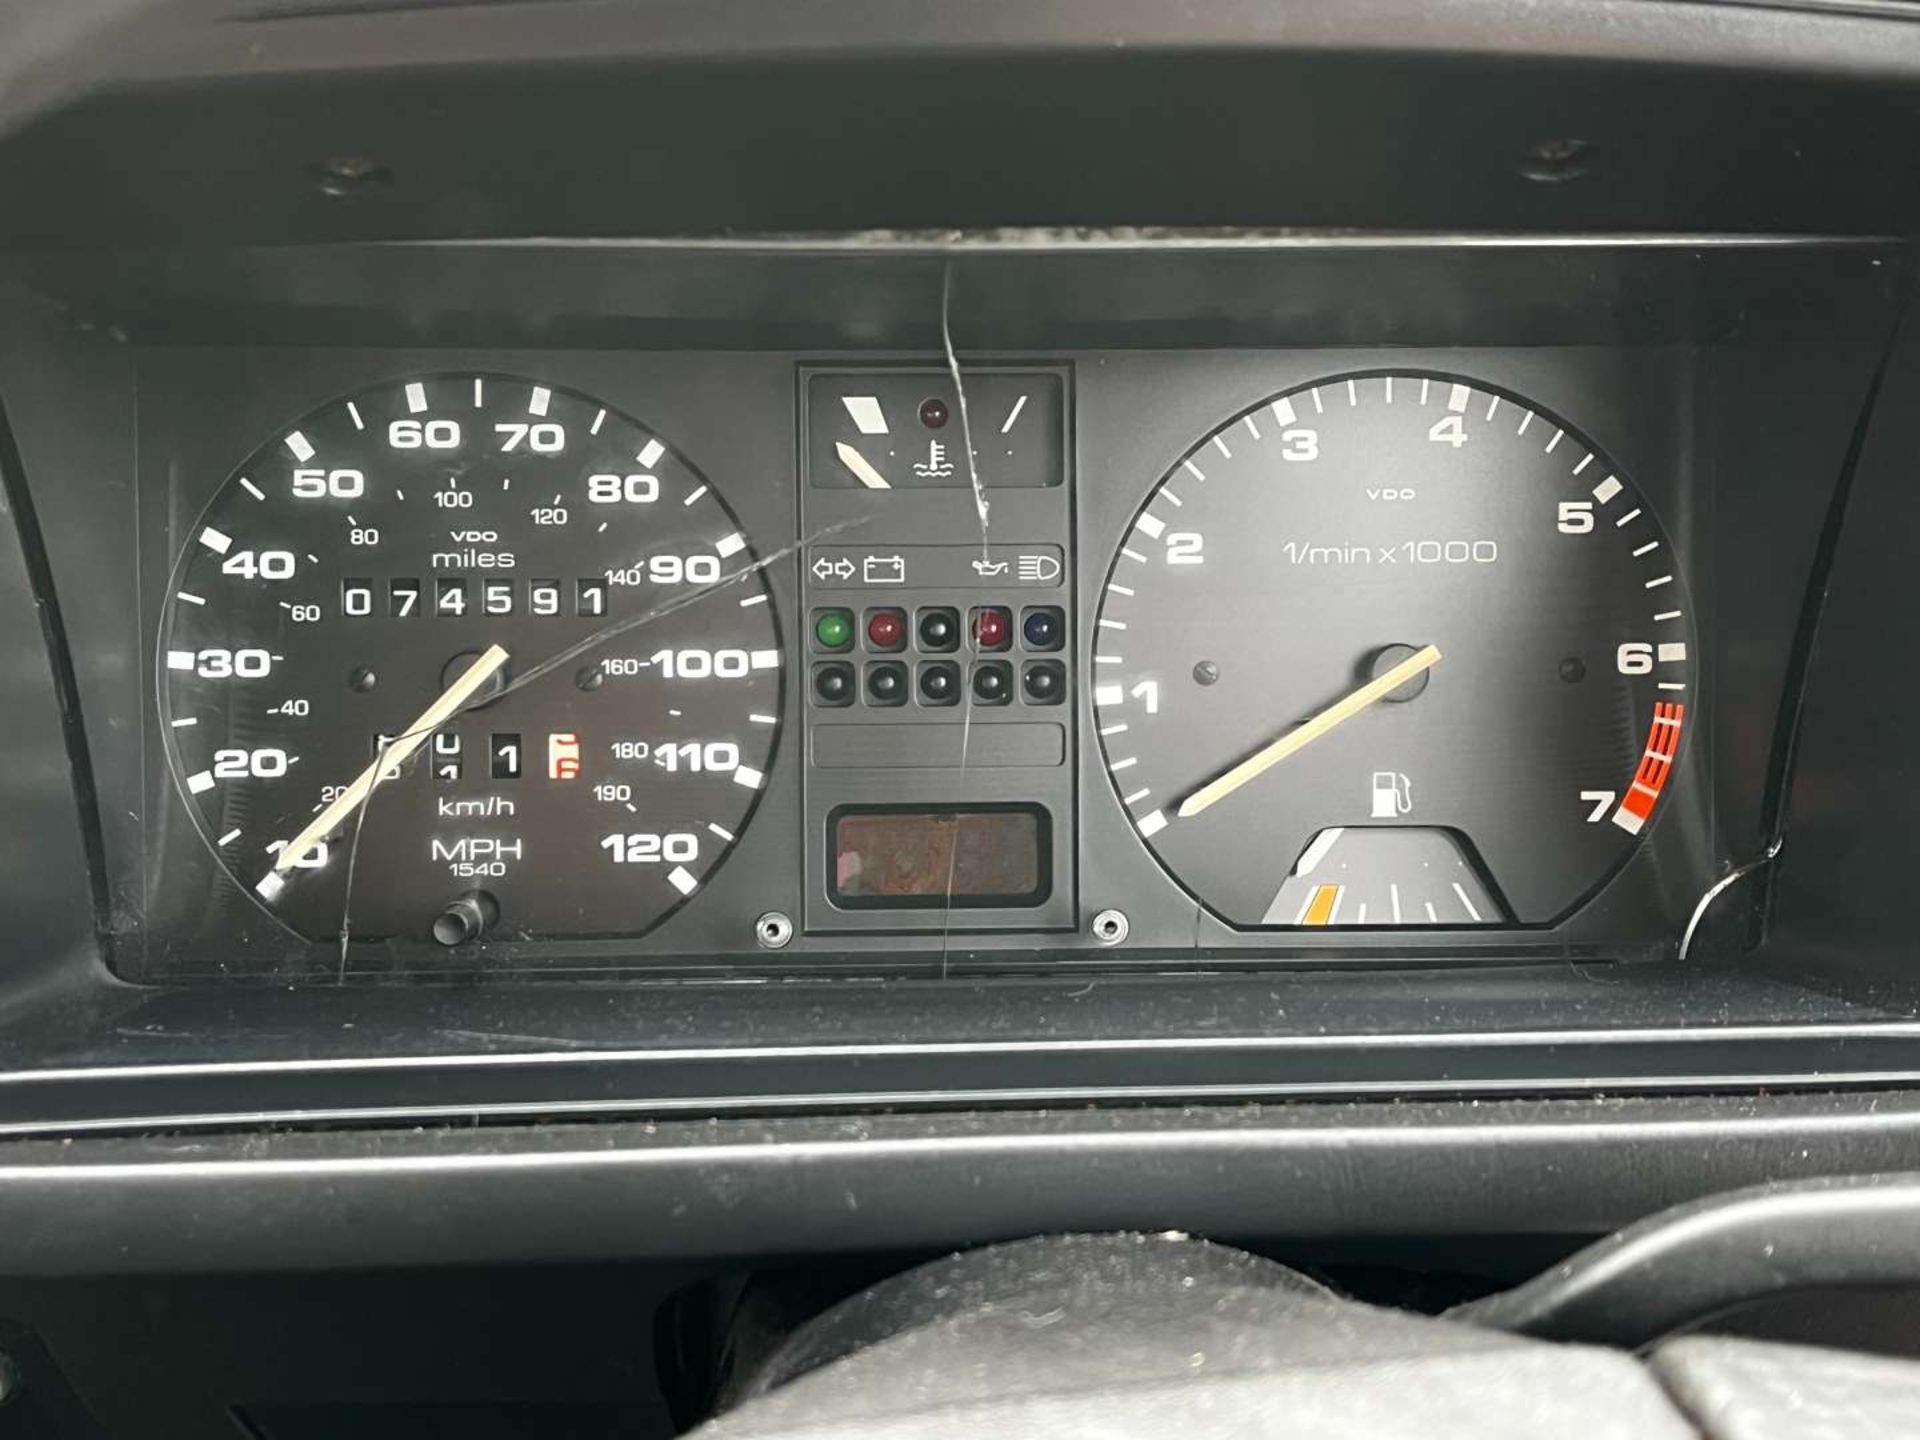 1990 VW SCIROCCO 1.8 GT - Image 21 of 29